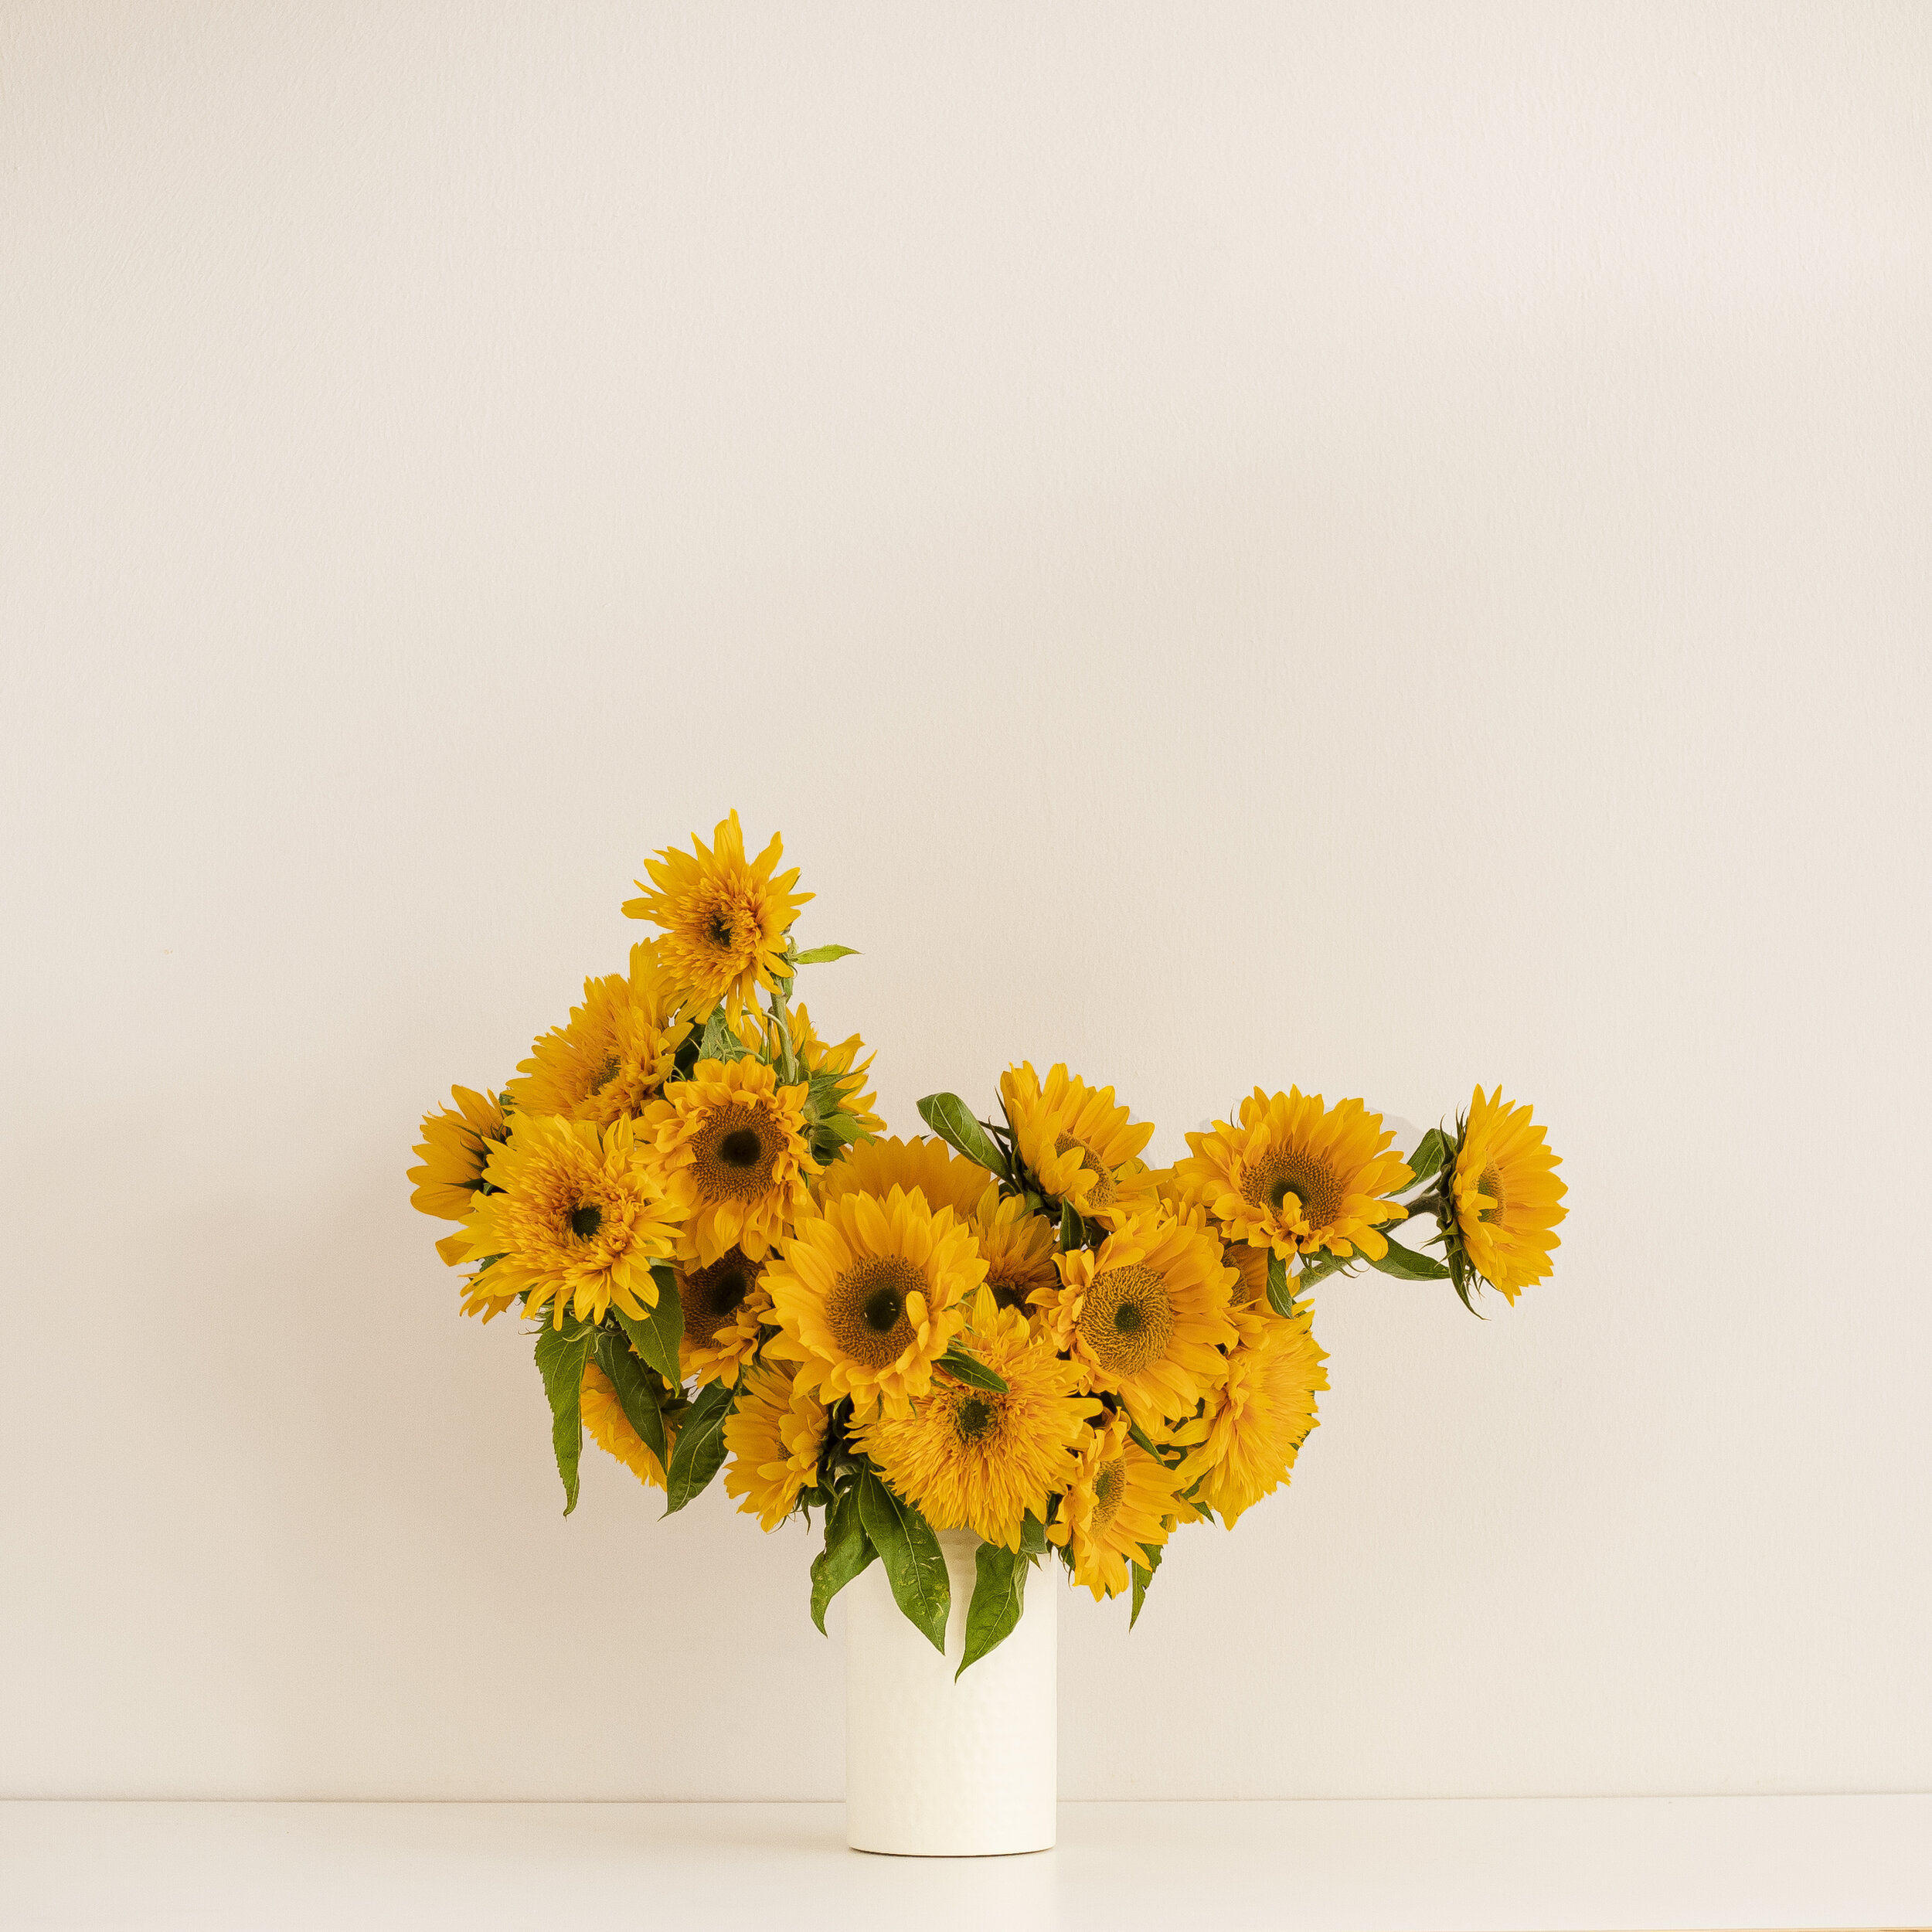 An arrangement of sunflowers sitting in a cream colored vase against a neutral background